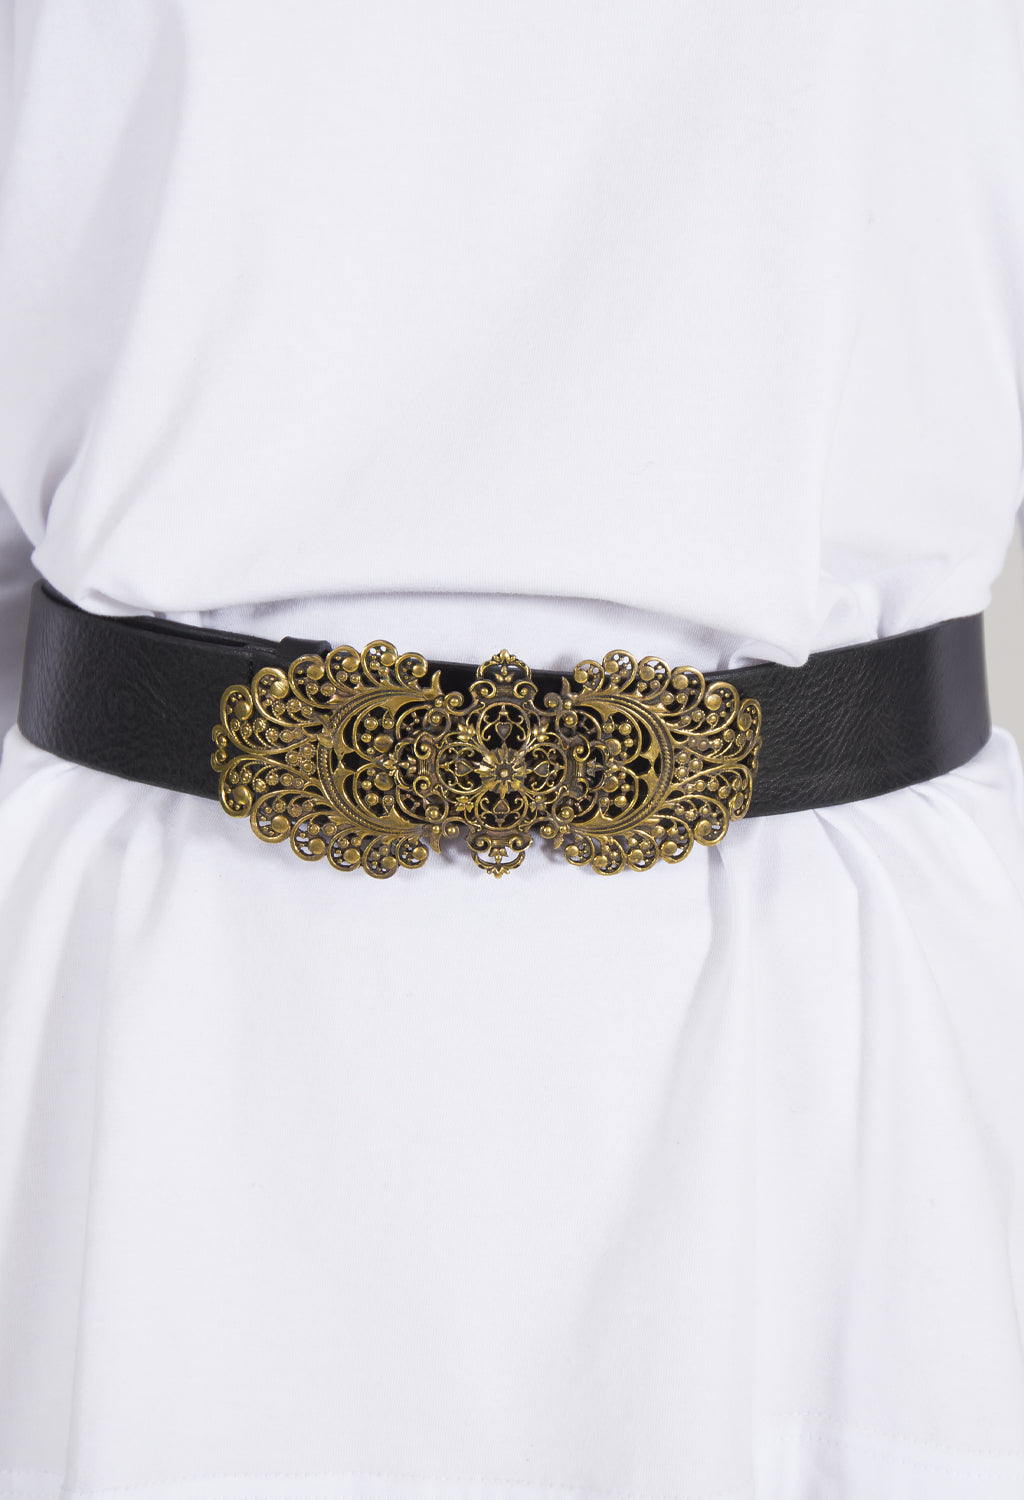 Belt with Ornate Plate Fastening in Black